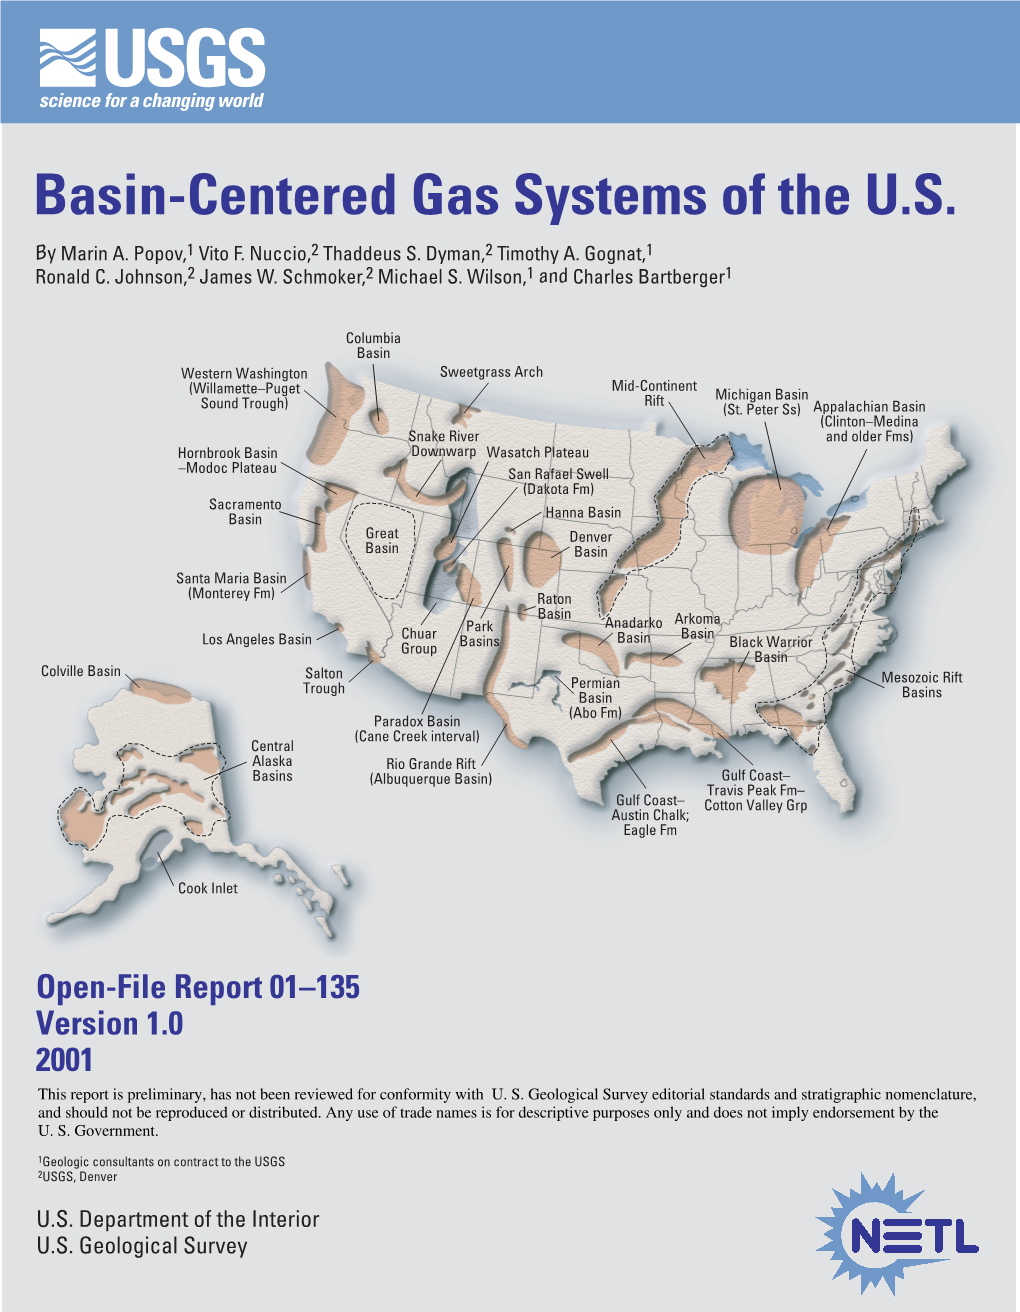 Basin-Centered Gas Systems of the U.S. by Marin A